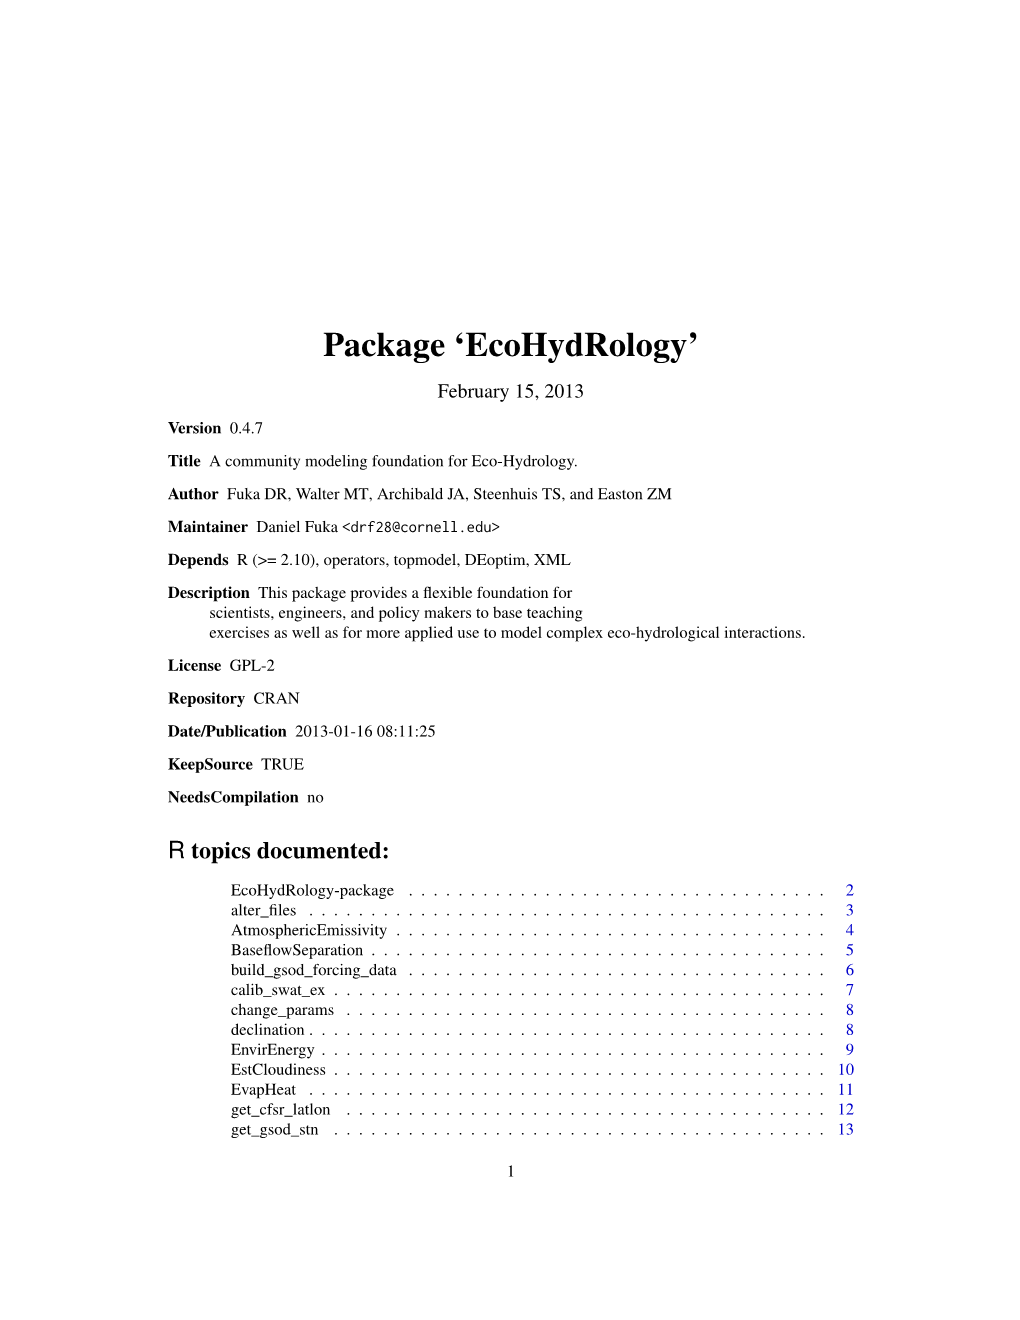 Package 'Ecohydrology'